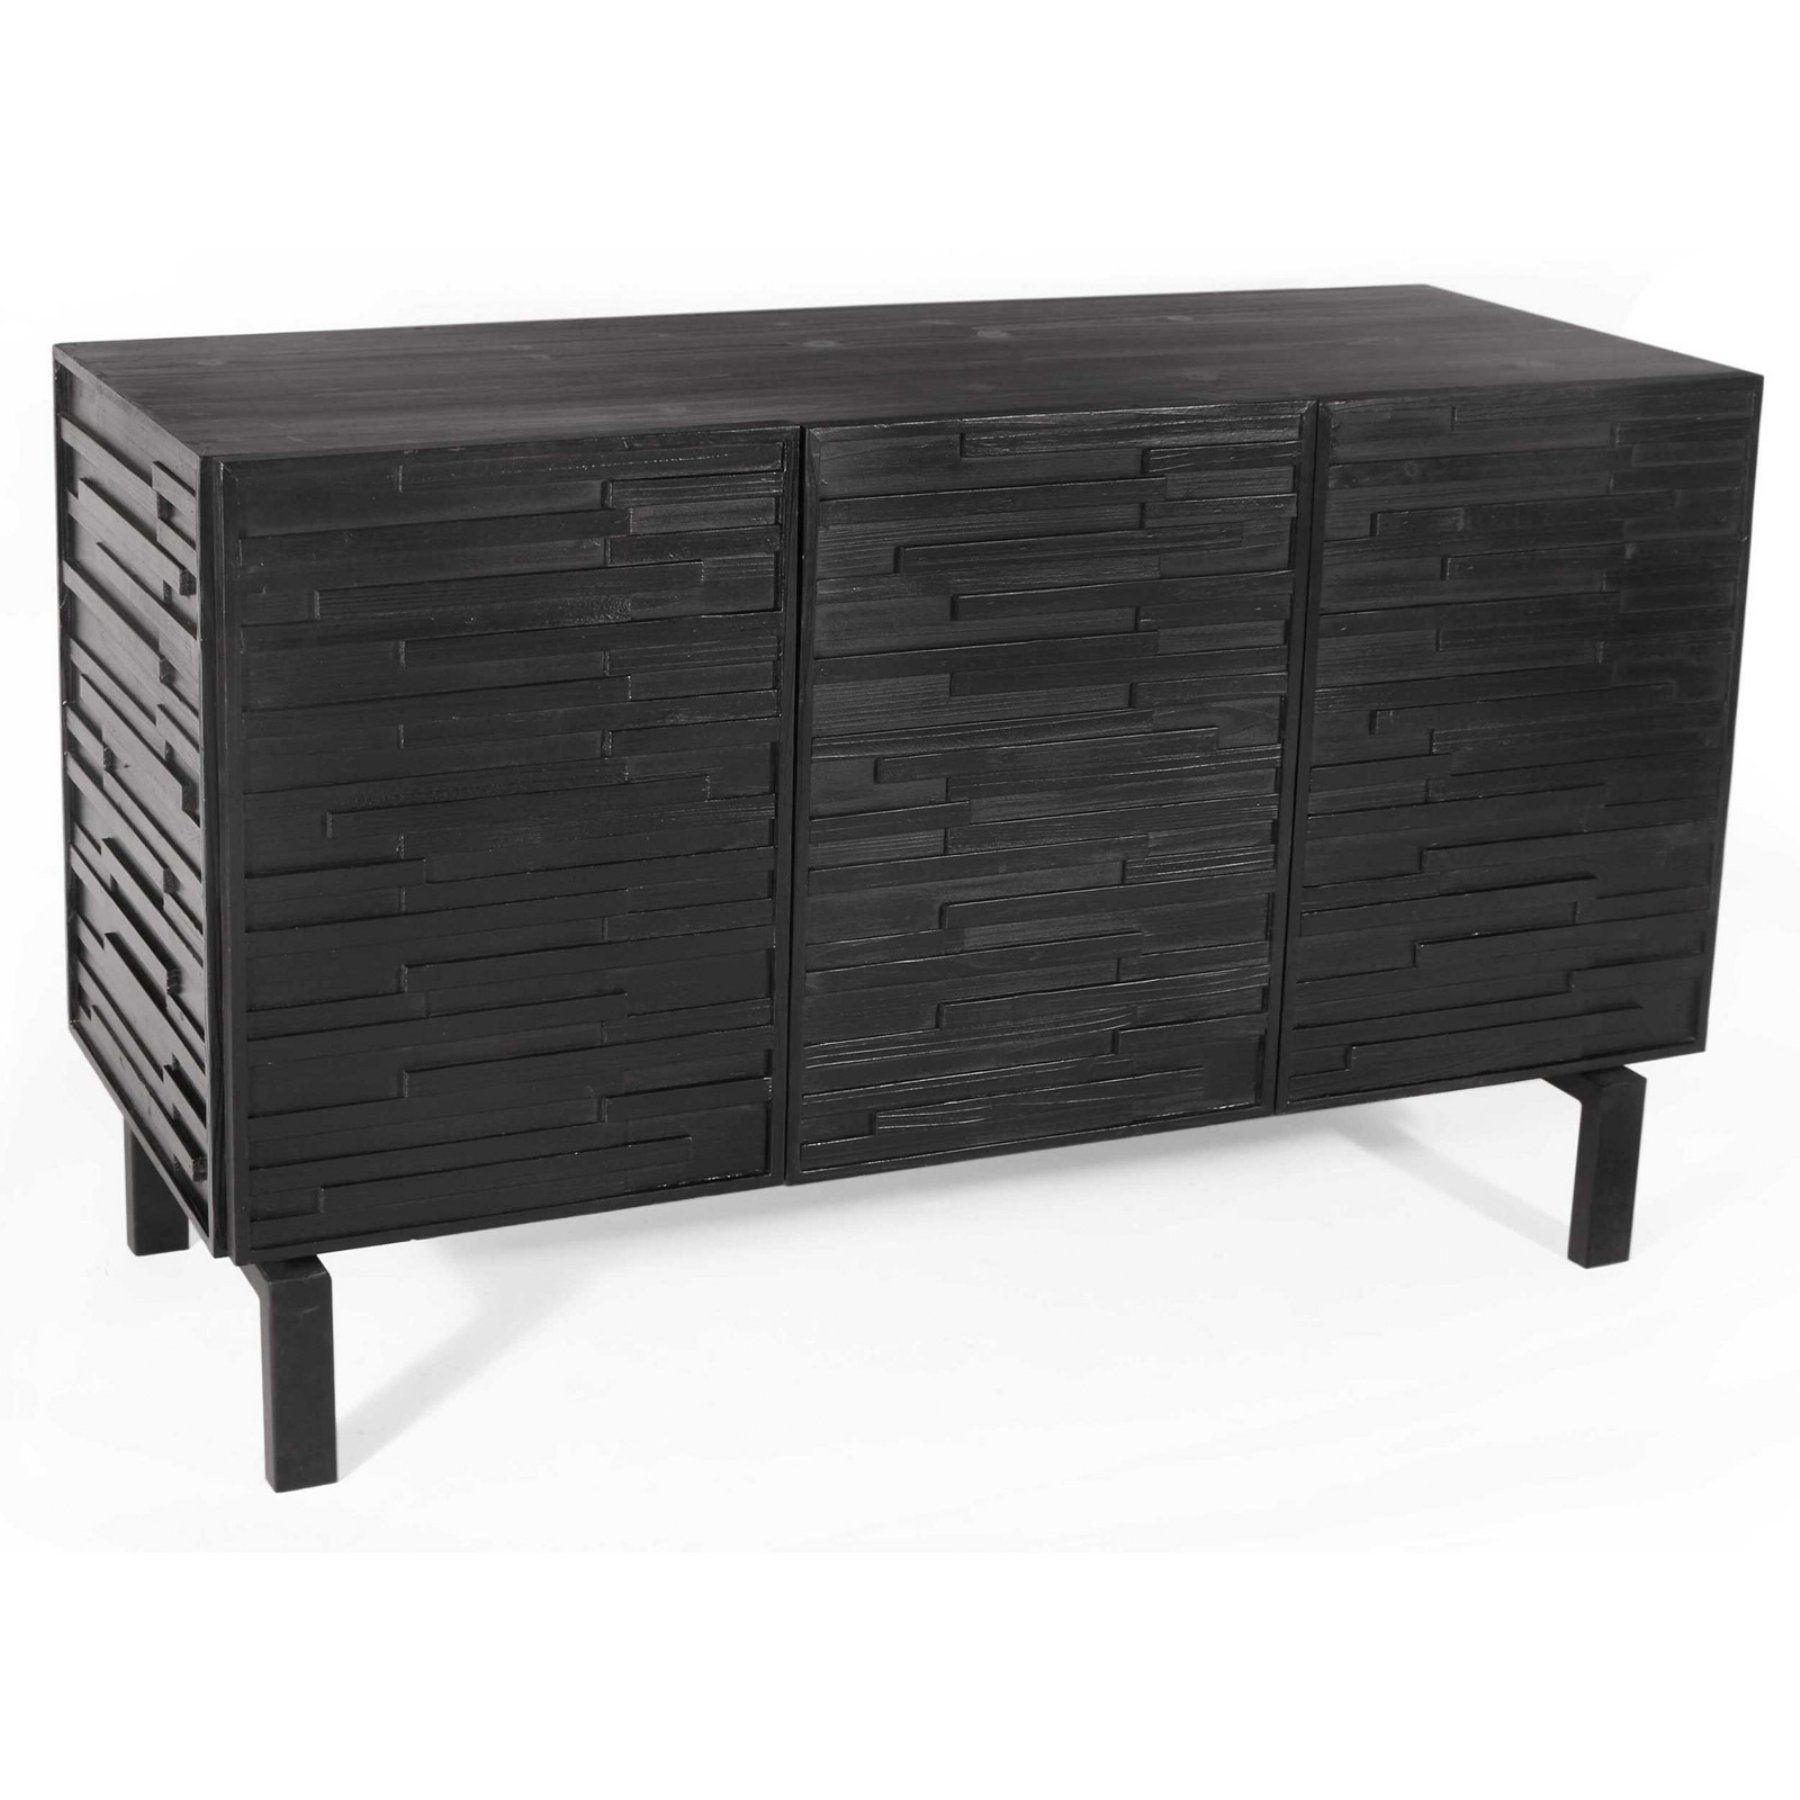 Gild Design House Nikos Sideboard In 2019 | Products Intended For Most Recent Casolino Sideboards (View 8 of 20)